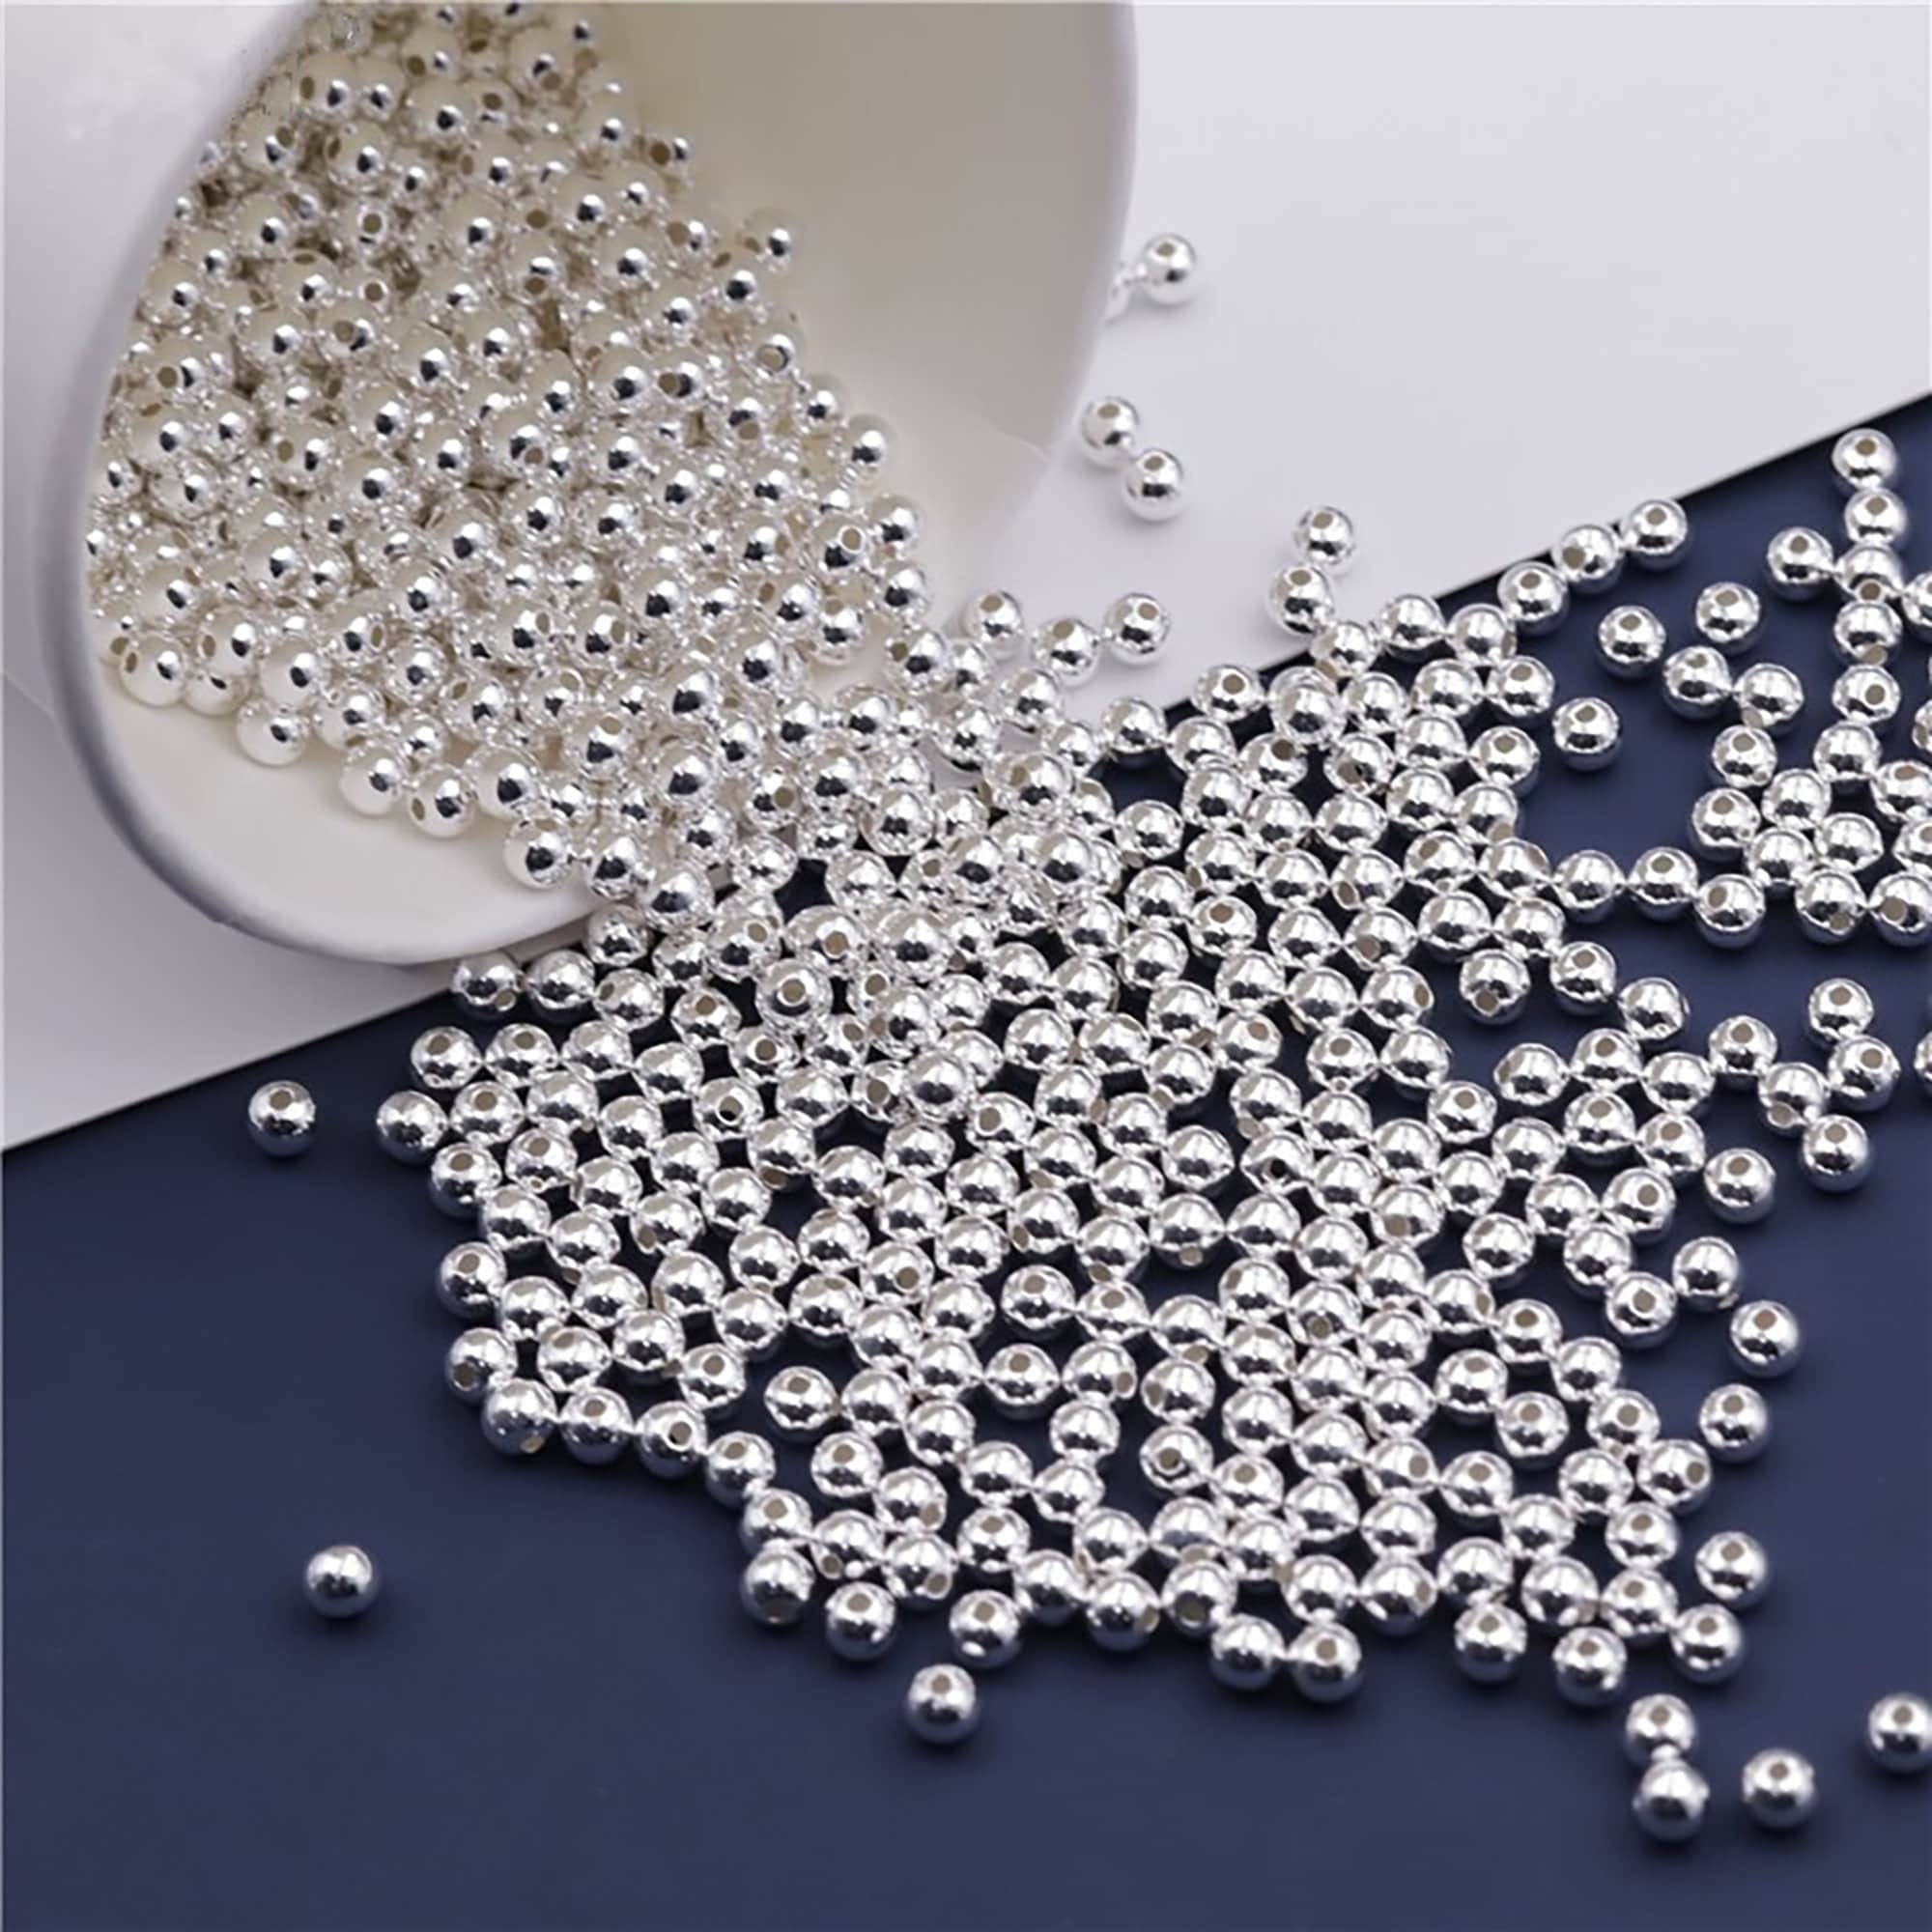 4mm 150pcs Flat Silver Disc Spacers Brushed Disk Spacer Beads